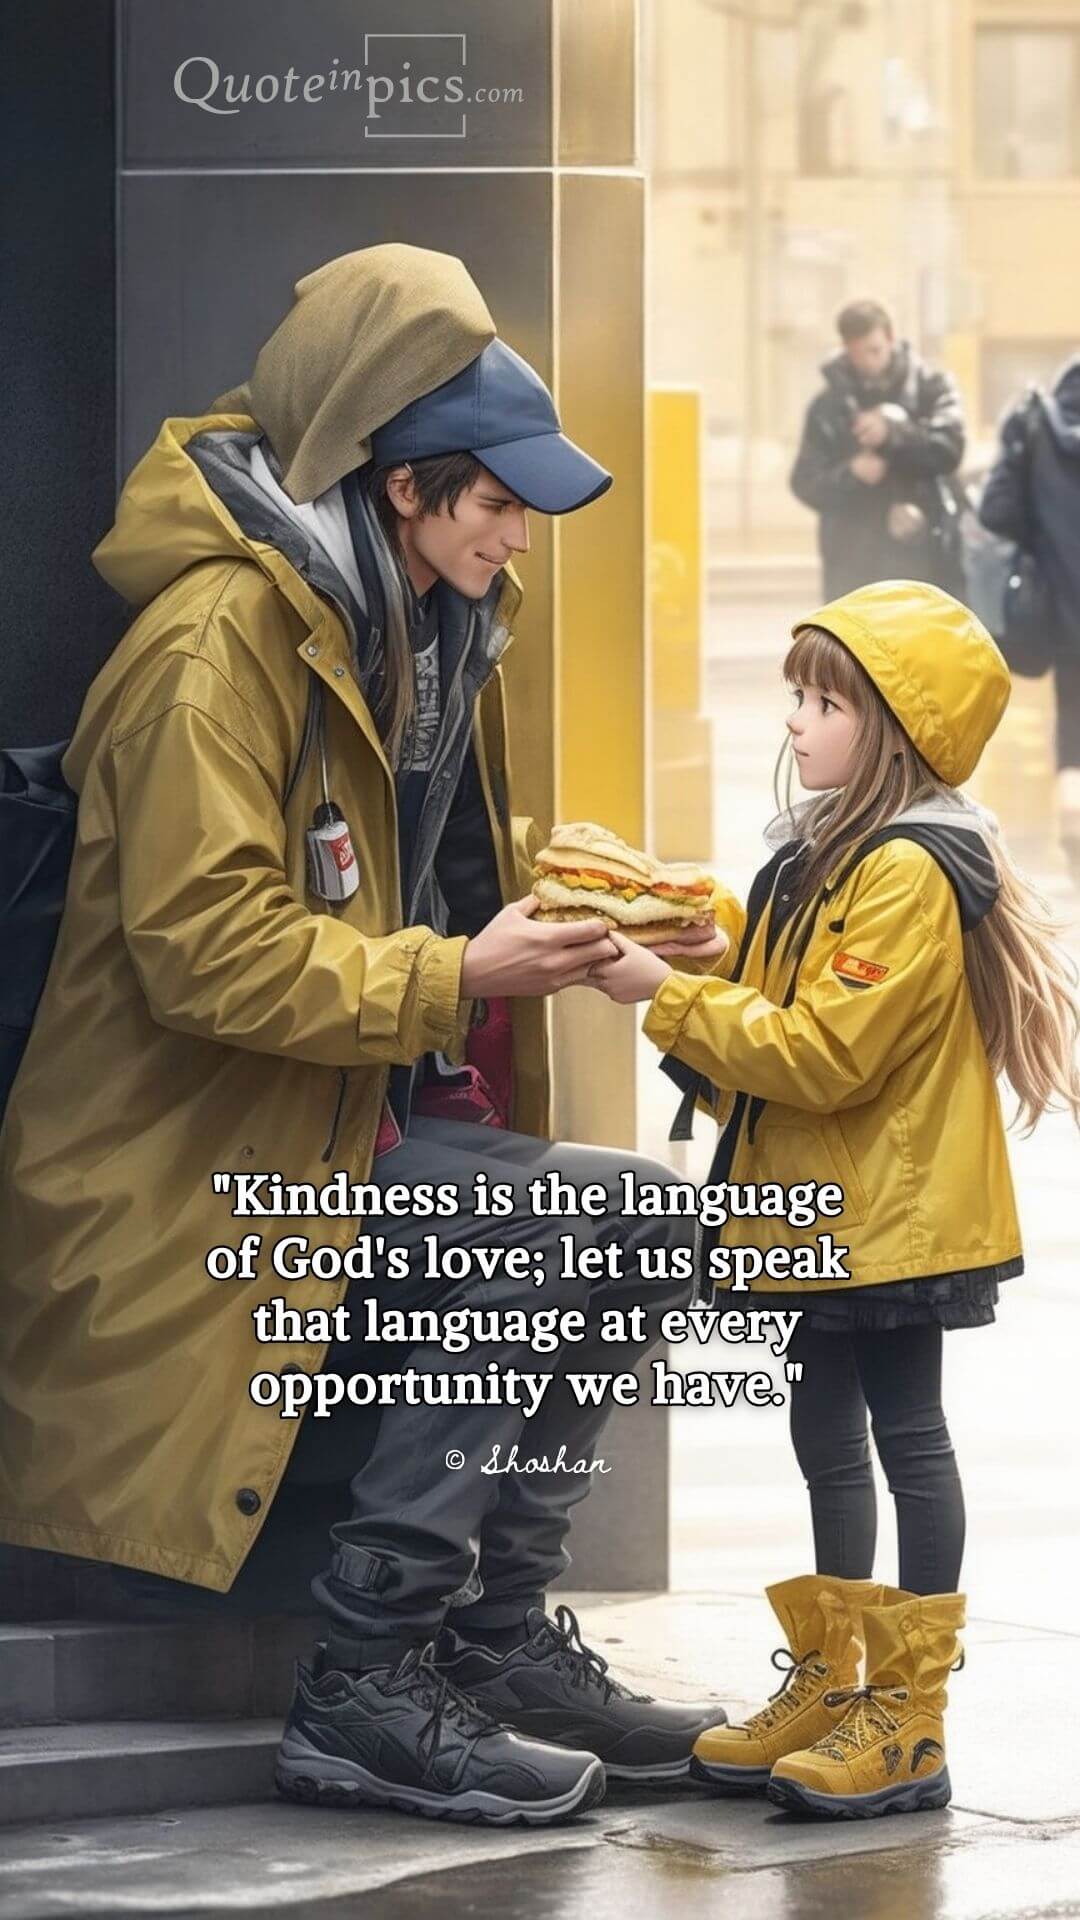 Kindness is the language of God's love; let us speak that language at every opportunity we have